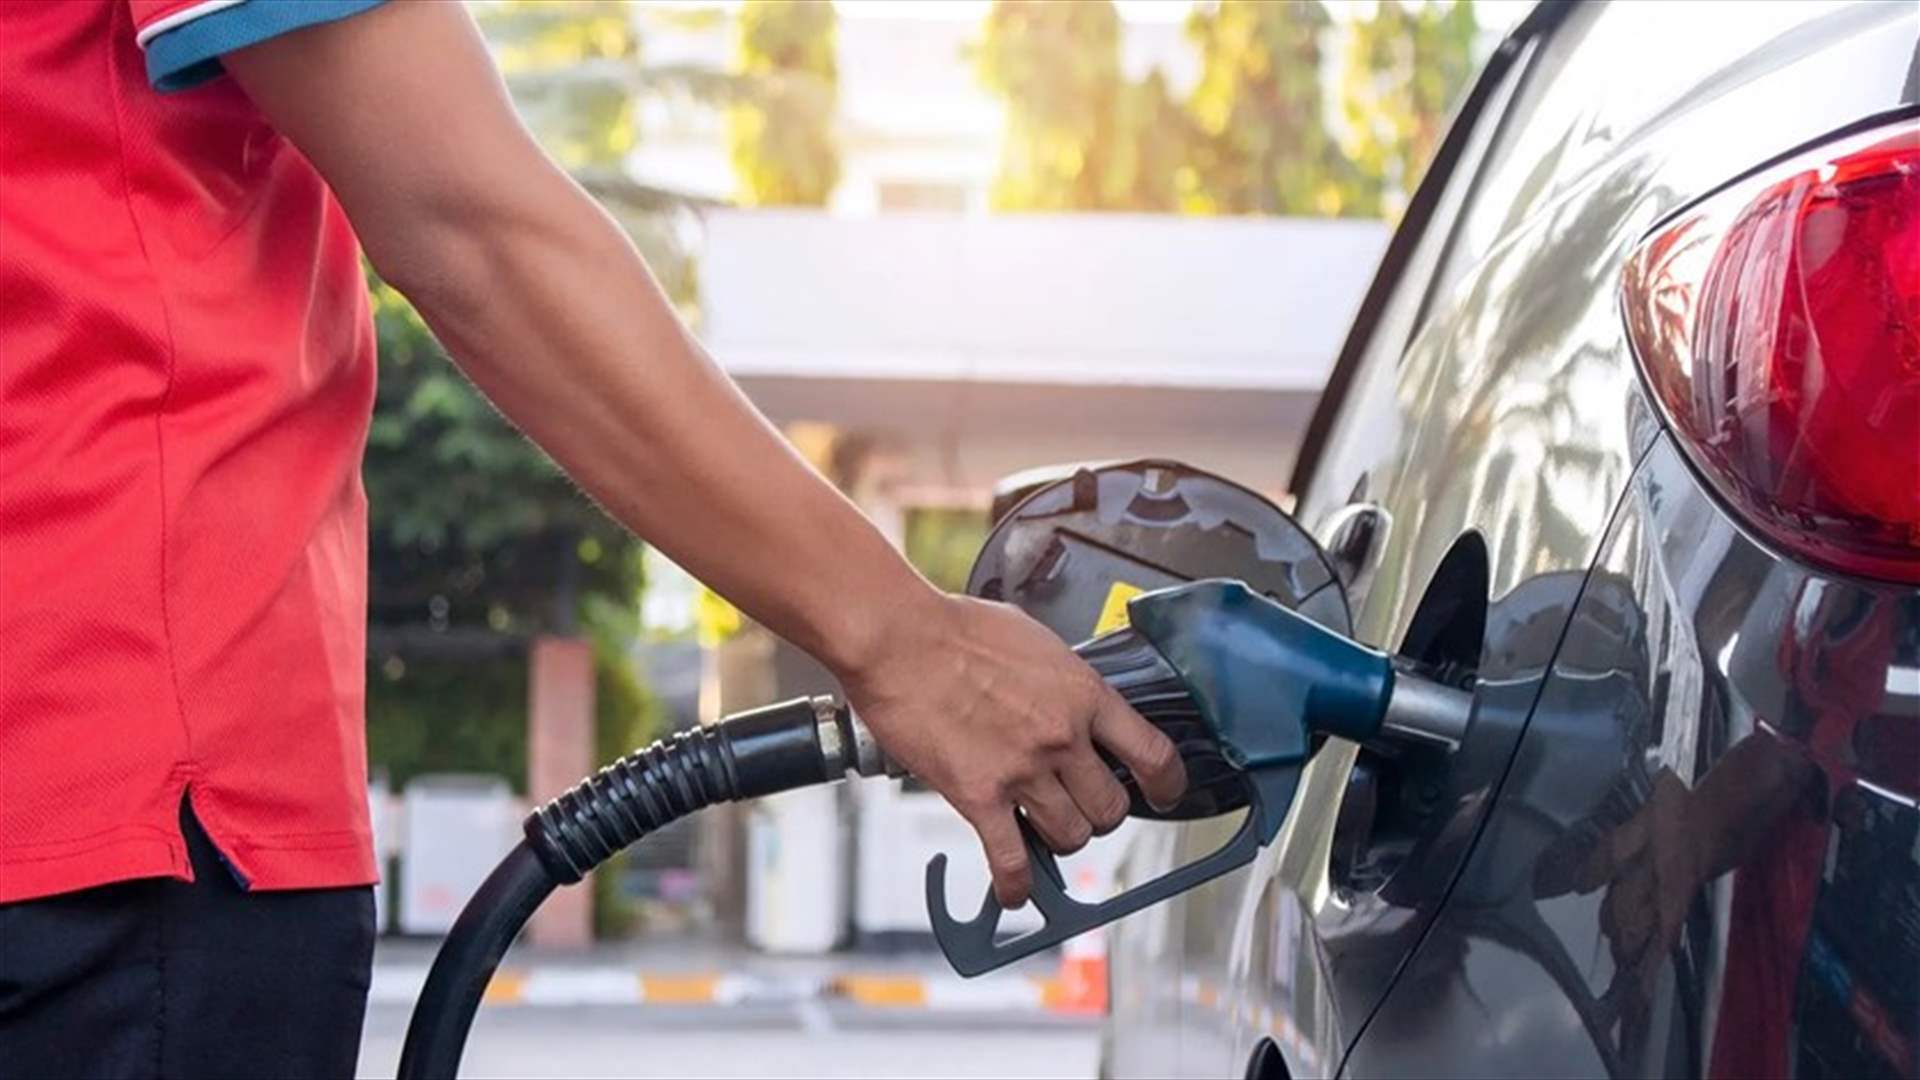 Price of 95 octane fuel decreases, gas and diesel prices increase in Lebanon 